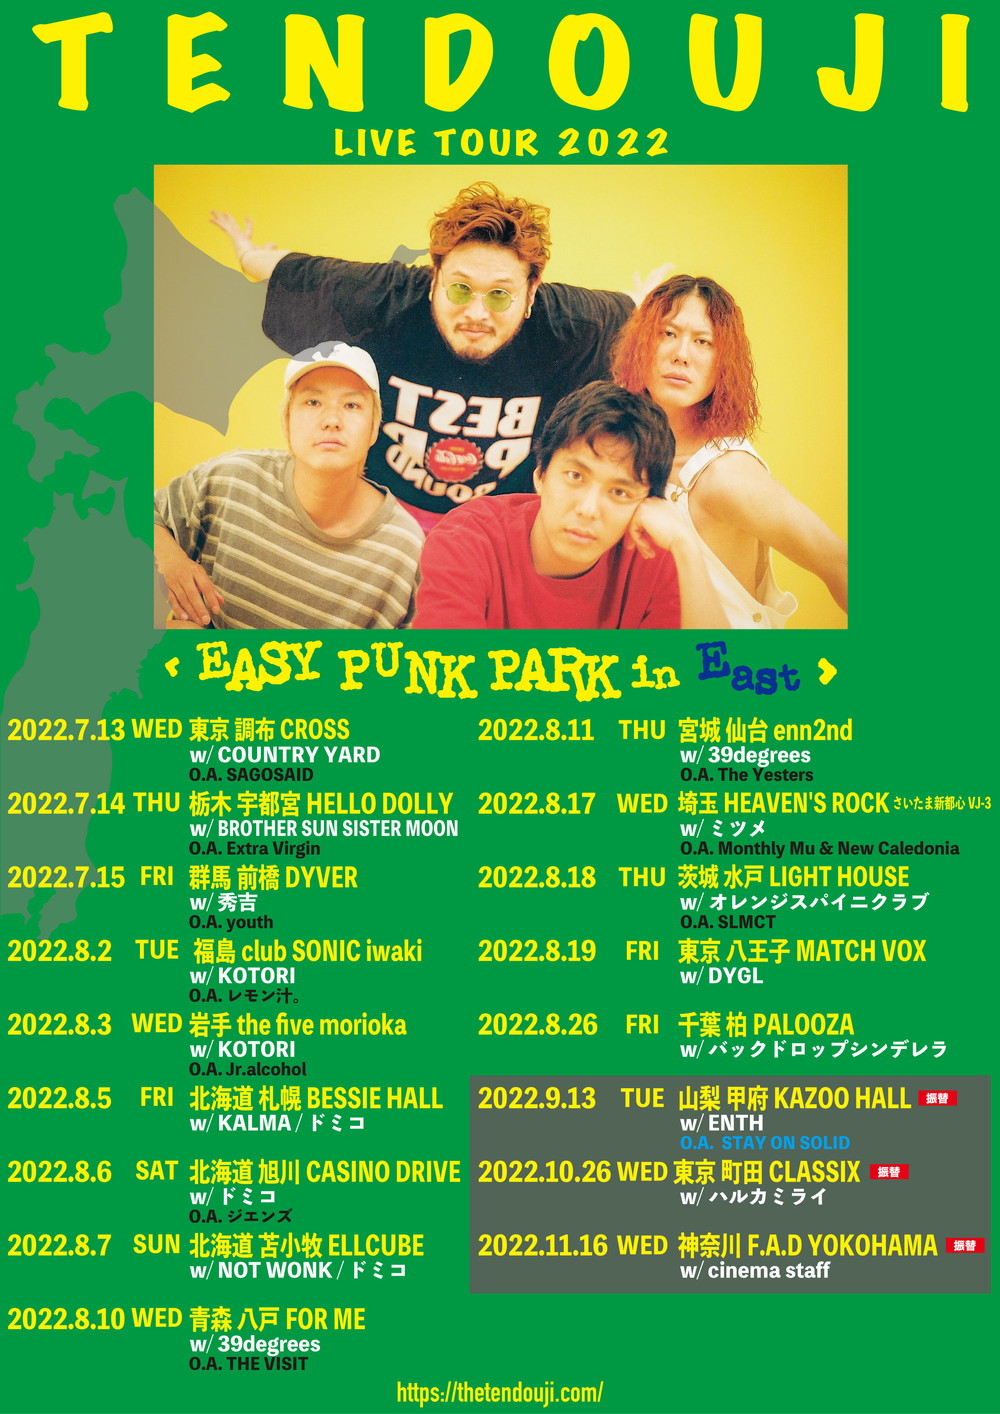 TENDOUJI、全国ツアーファイナル『EASY PUNK PARK in TOKYO』開催決定 - 画像一覧（1/4）